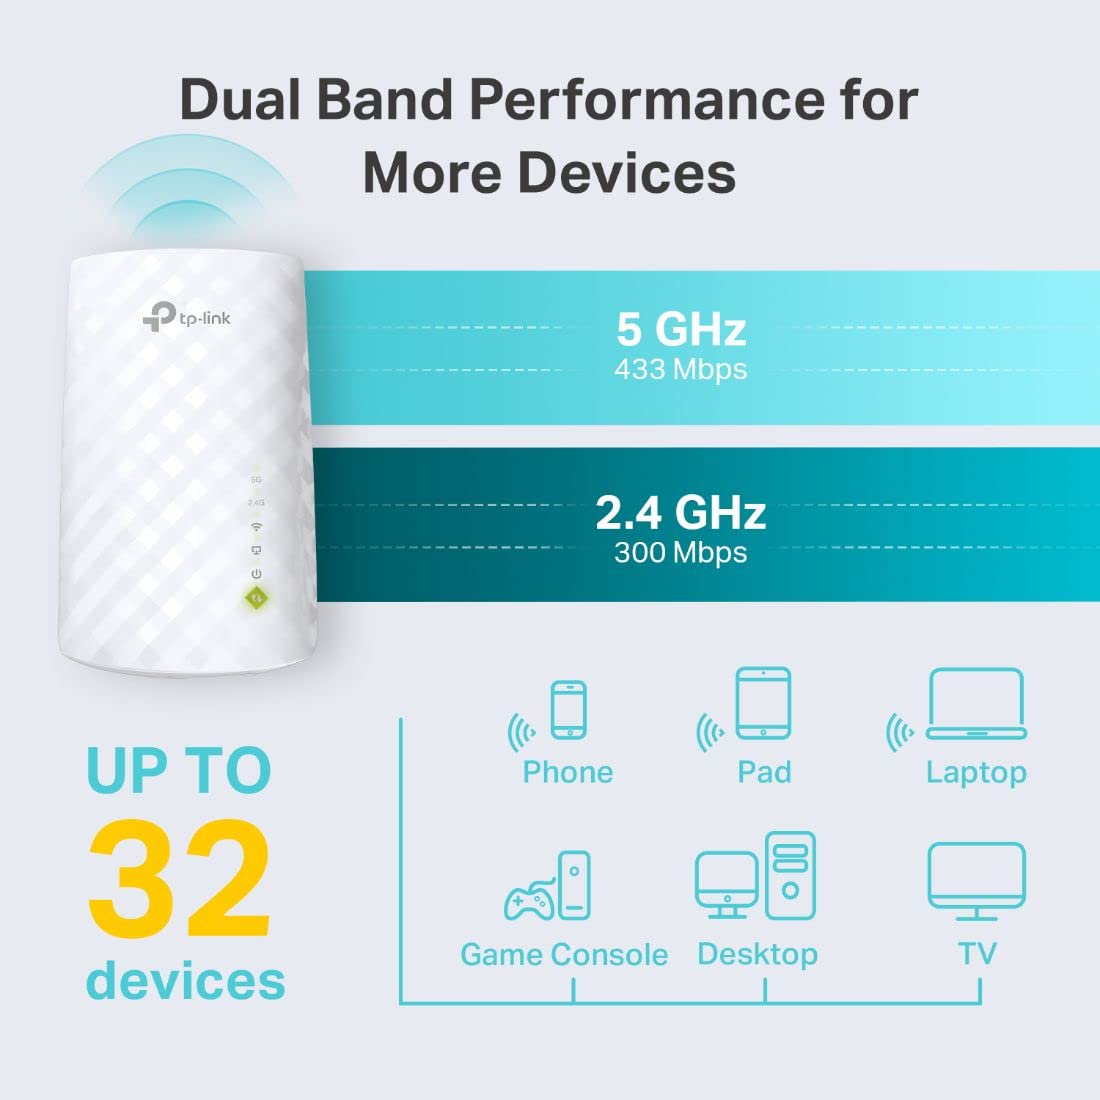 TP-Link AC750 WiFi Extender (RE220) - Covers Up to 1,200 Sq.ft and 20 Devices, Up to 750Mbps, Dual Band WiFi Range Extender, WiFi Booster to Extend Range of WiFi Internet Connection